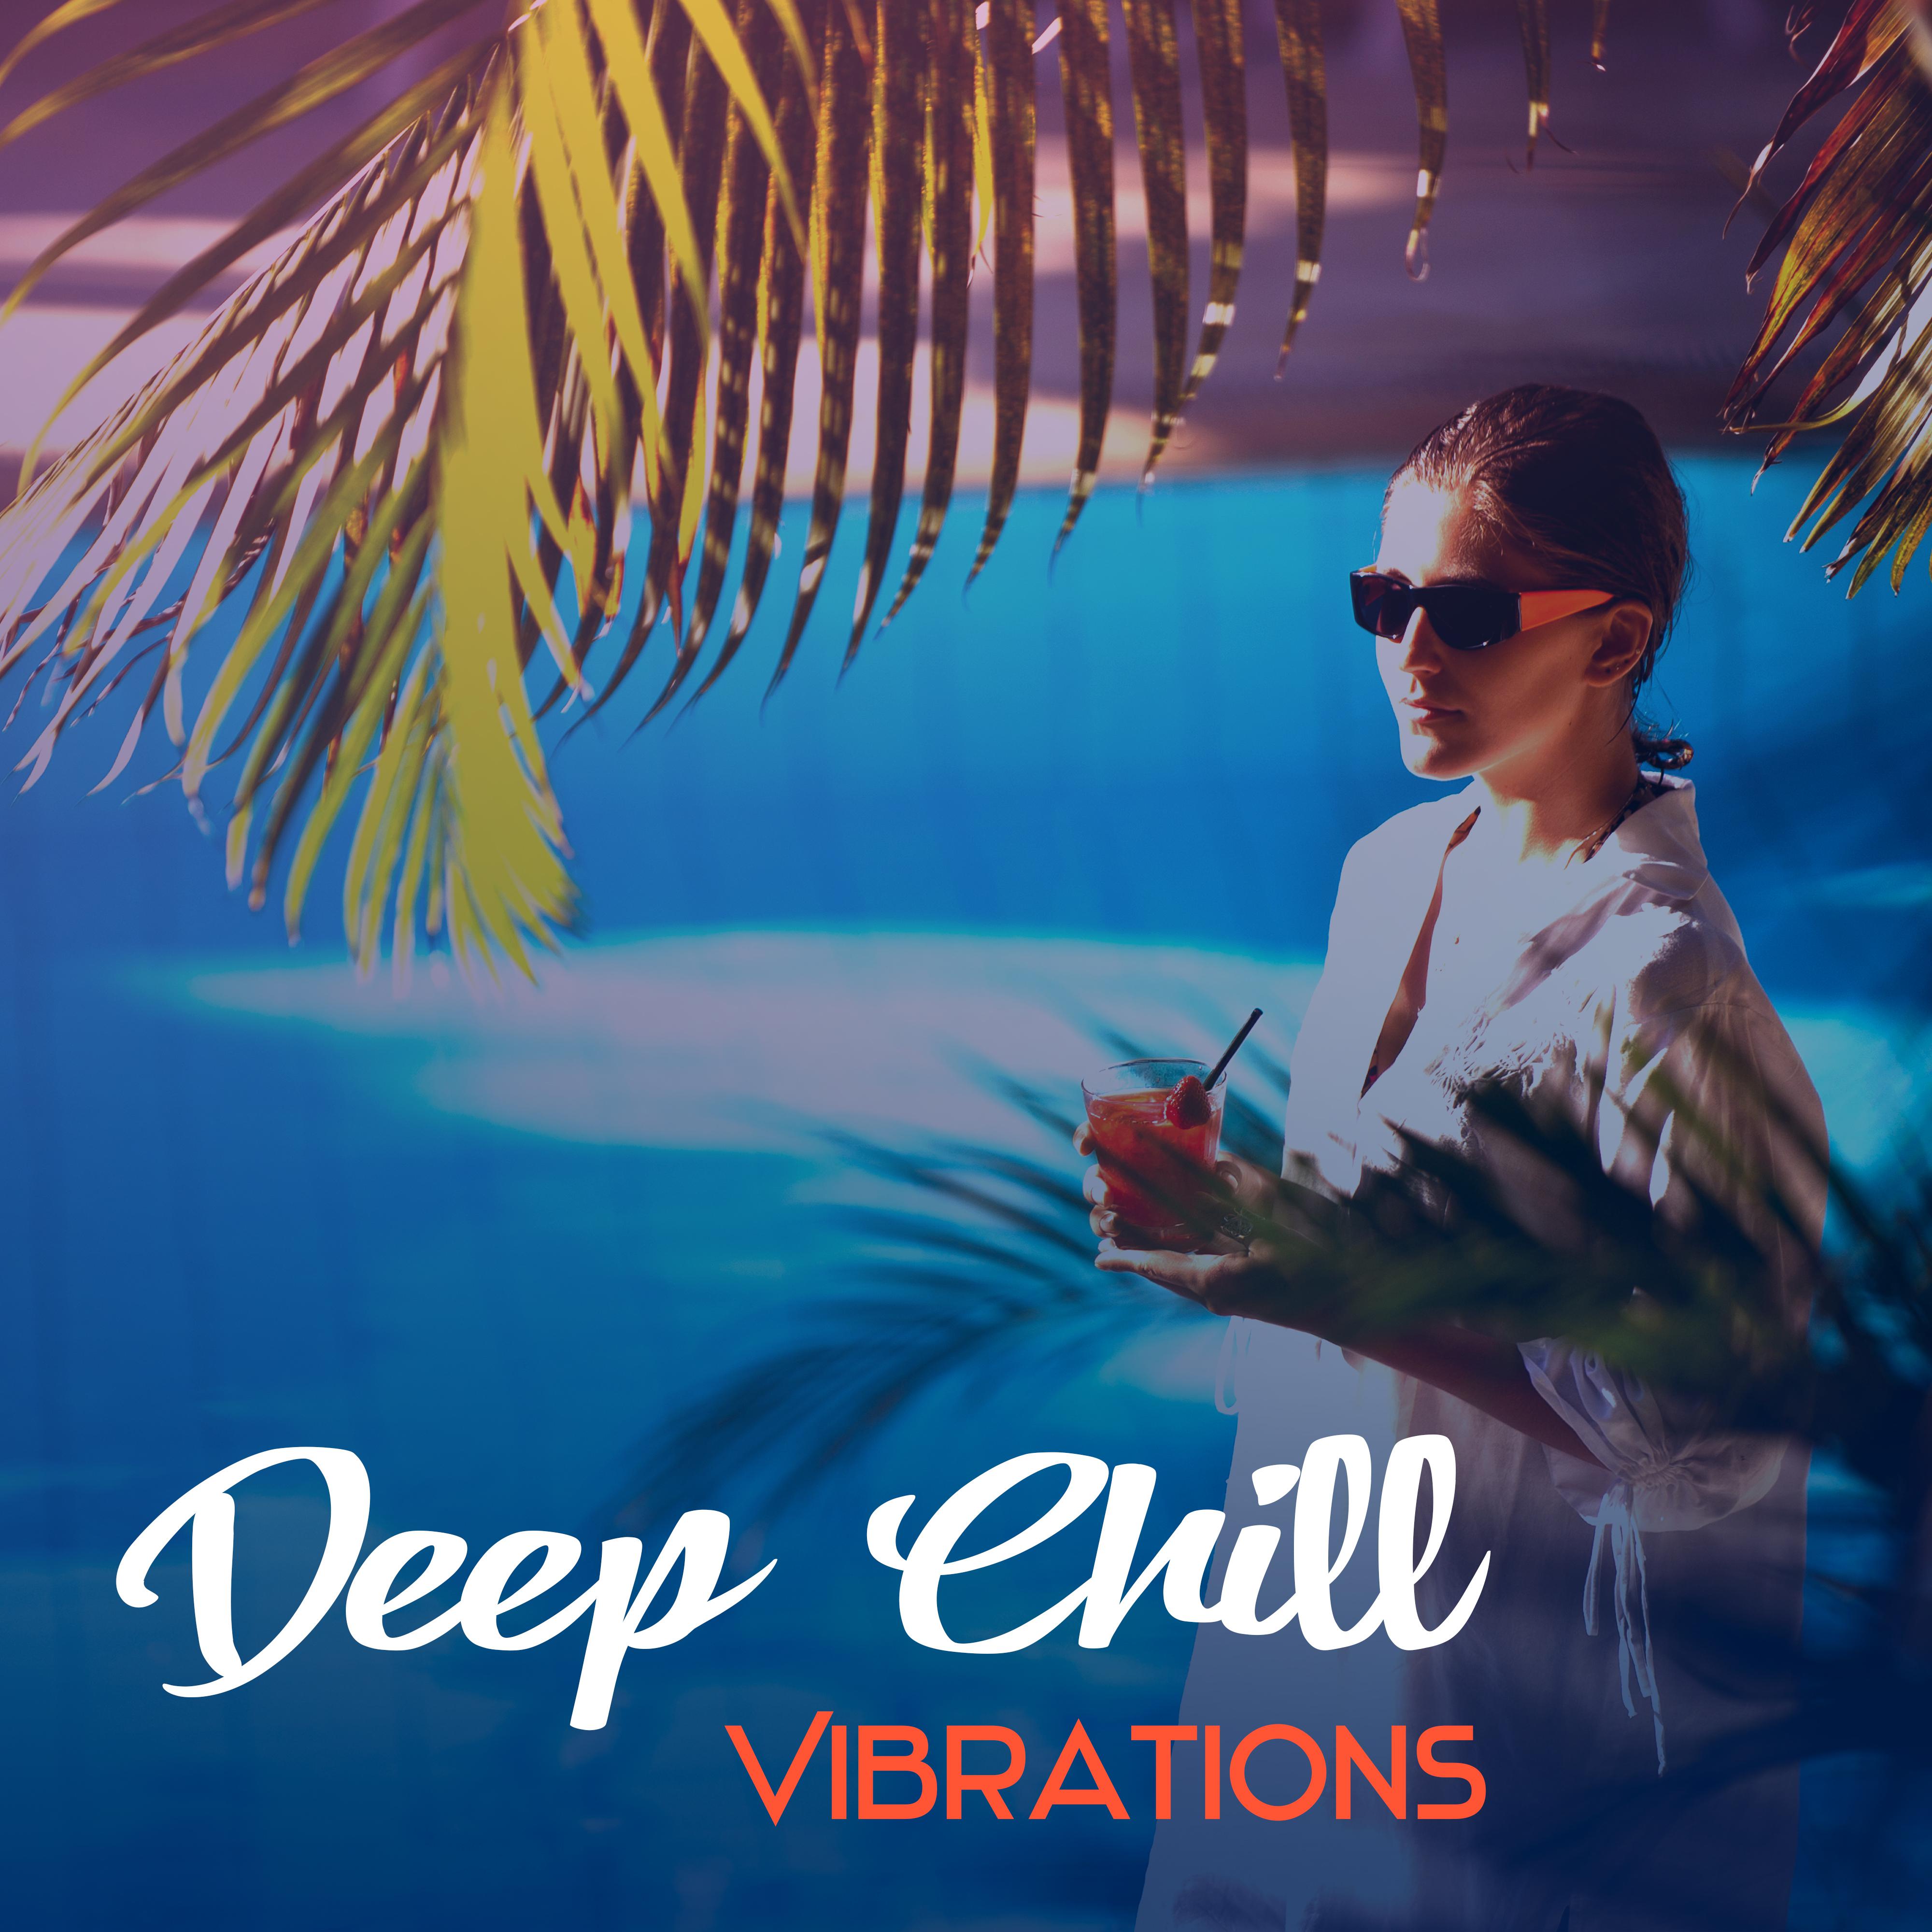 Deep Chill  Vibrations  Sumer Collection, Positive Vibes of Chill Out